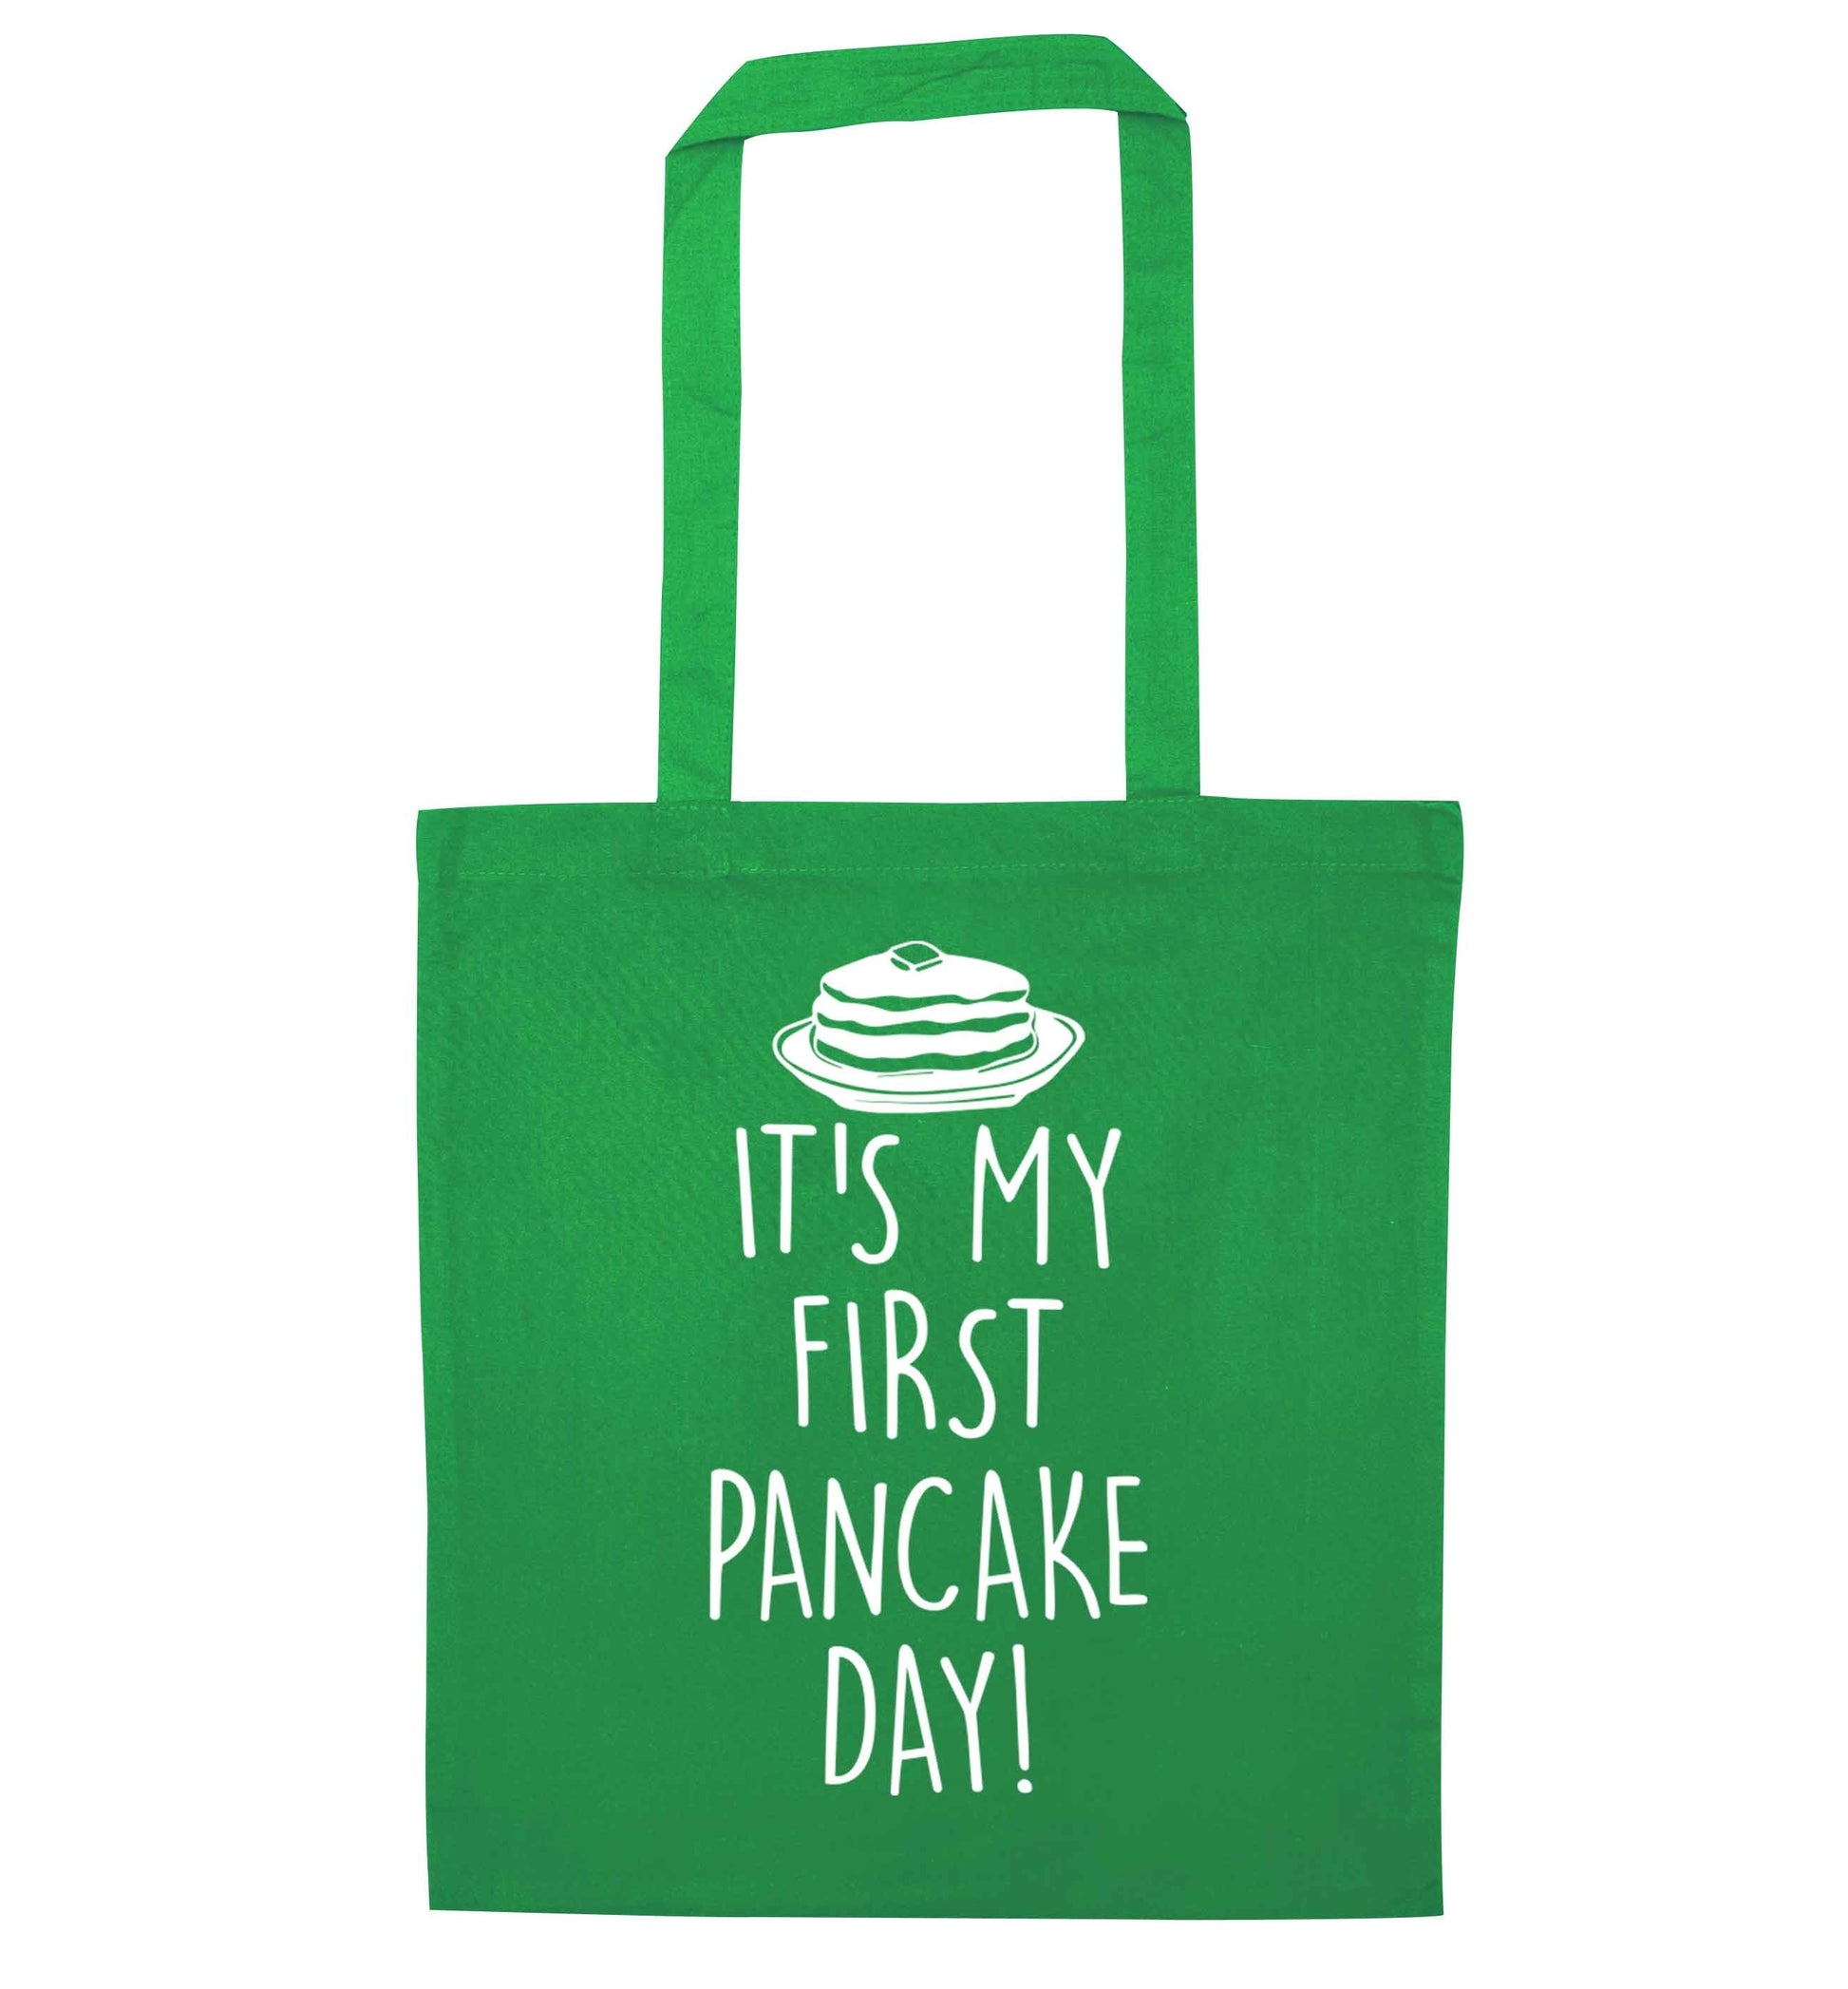 It's my first pancake day green tote bag